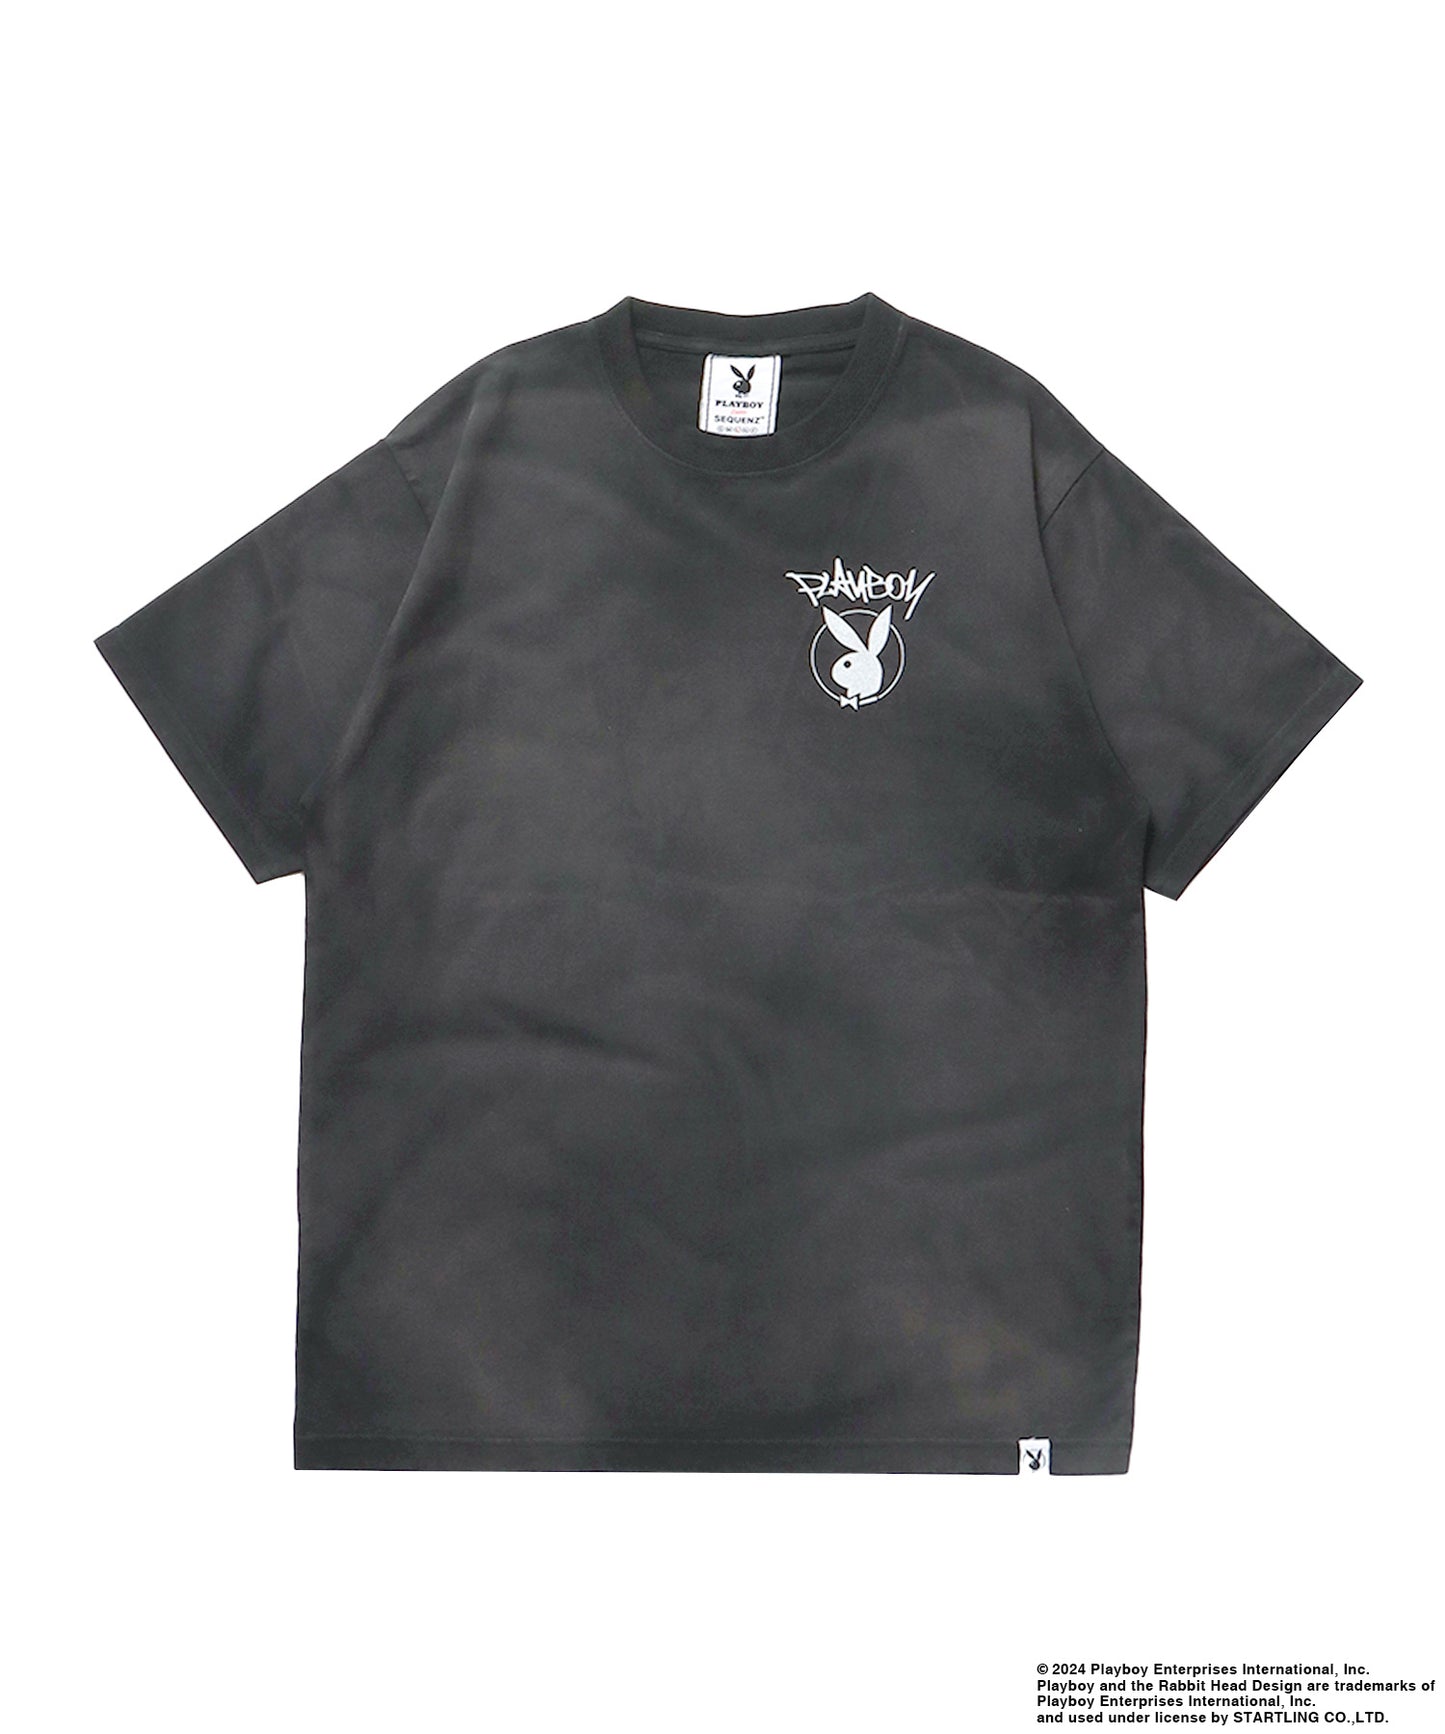 PB O.G LOGO FADE S/S TEE / PLAYBOY×Sequenz フェード加工 90s ヴィンテージ Tシャツ グラフィティ プリント 半袖 ブラック